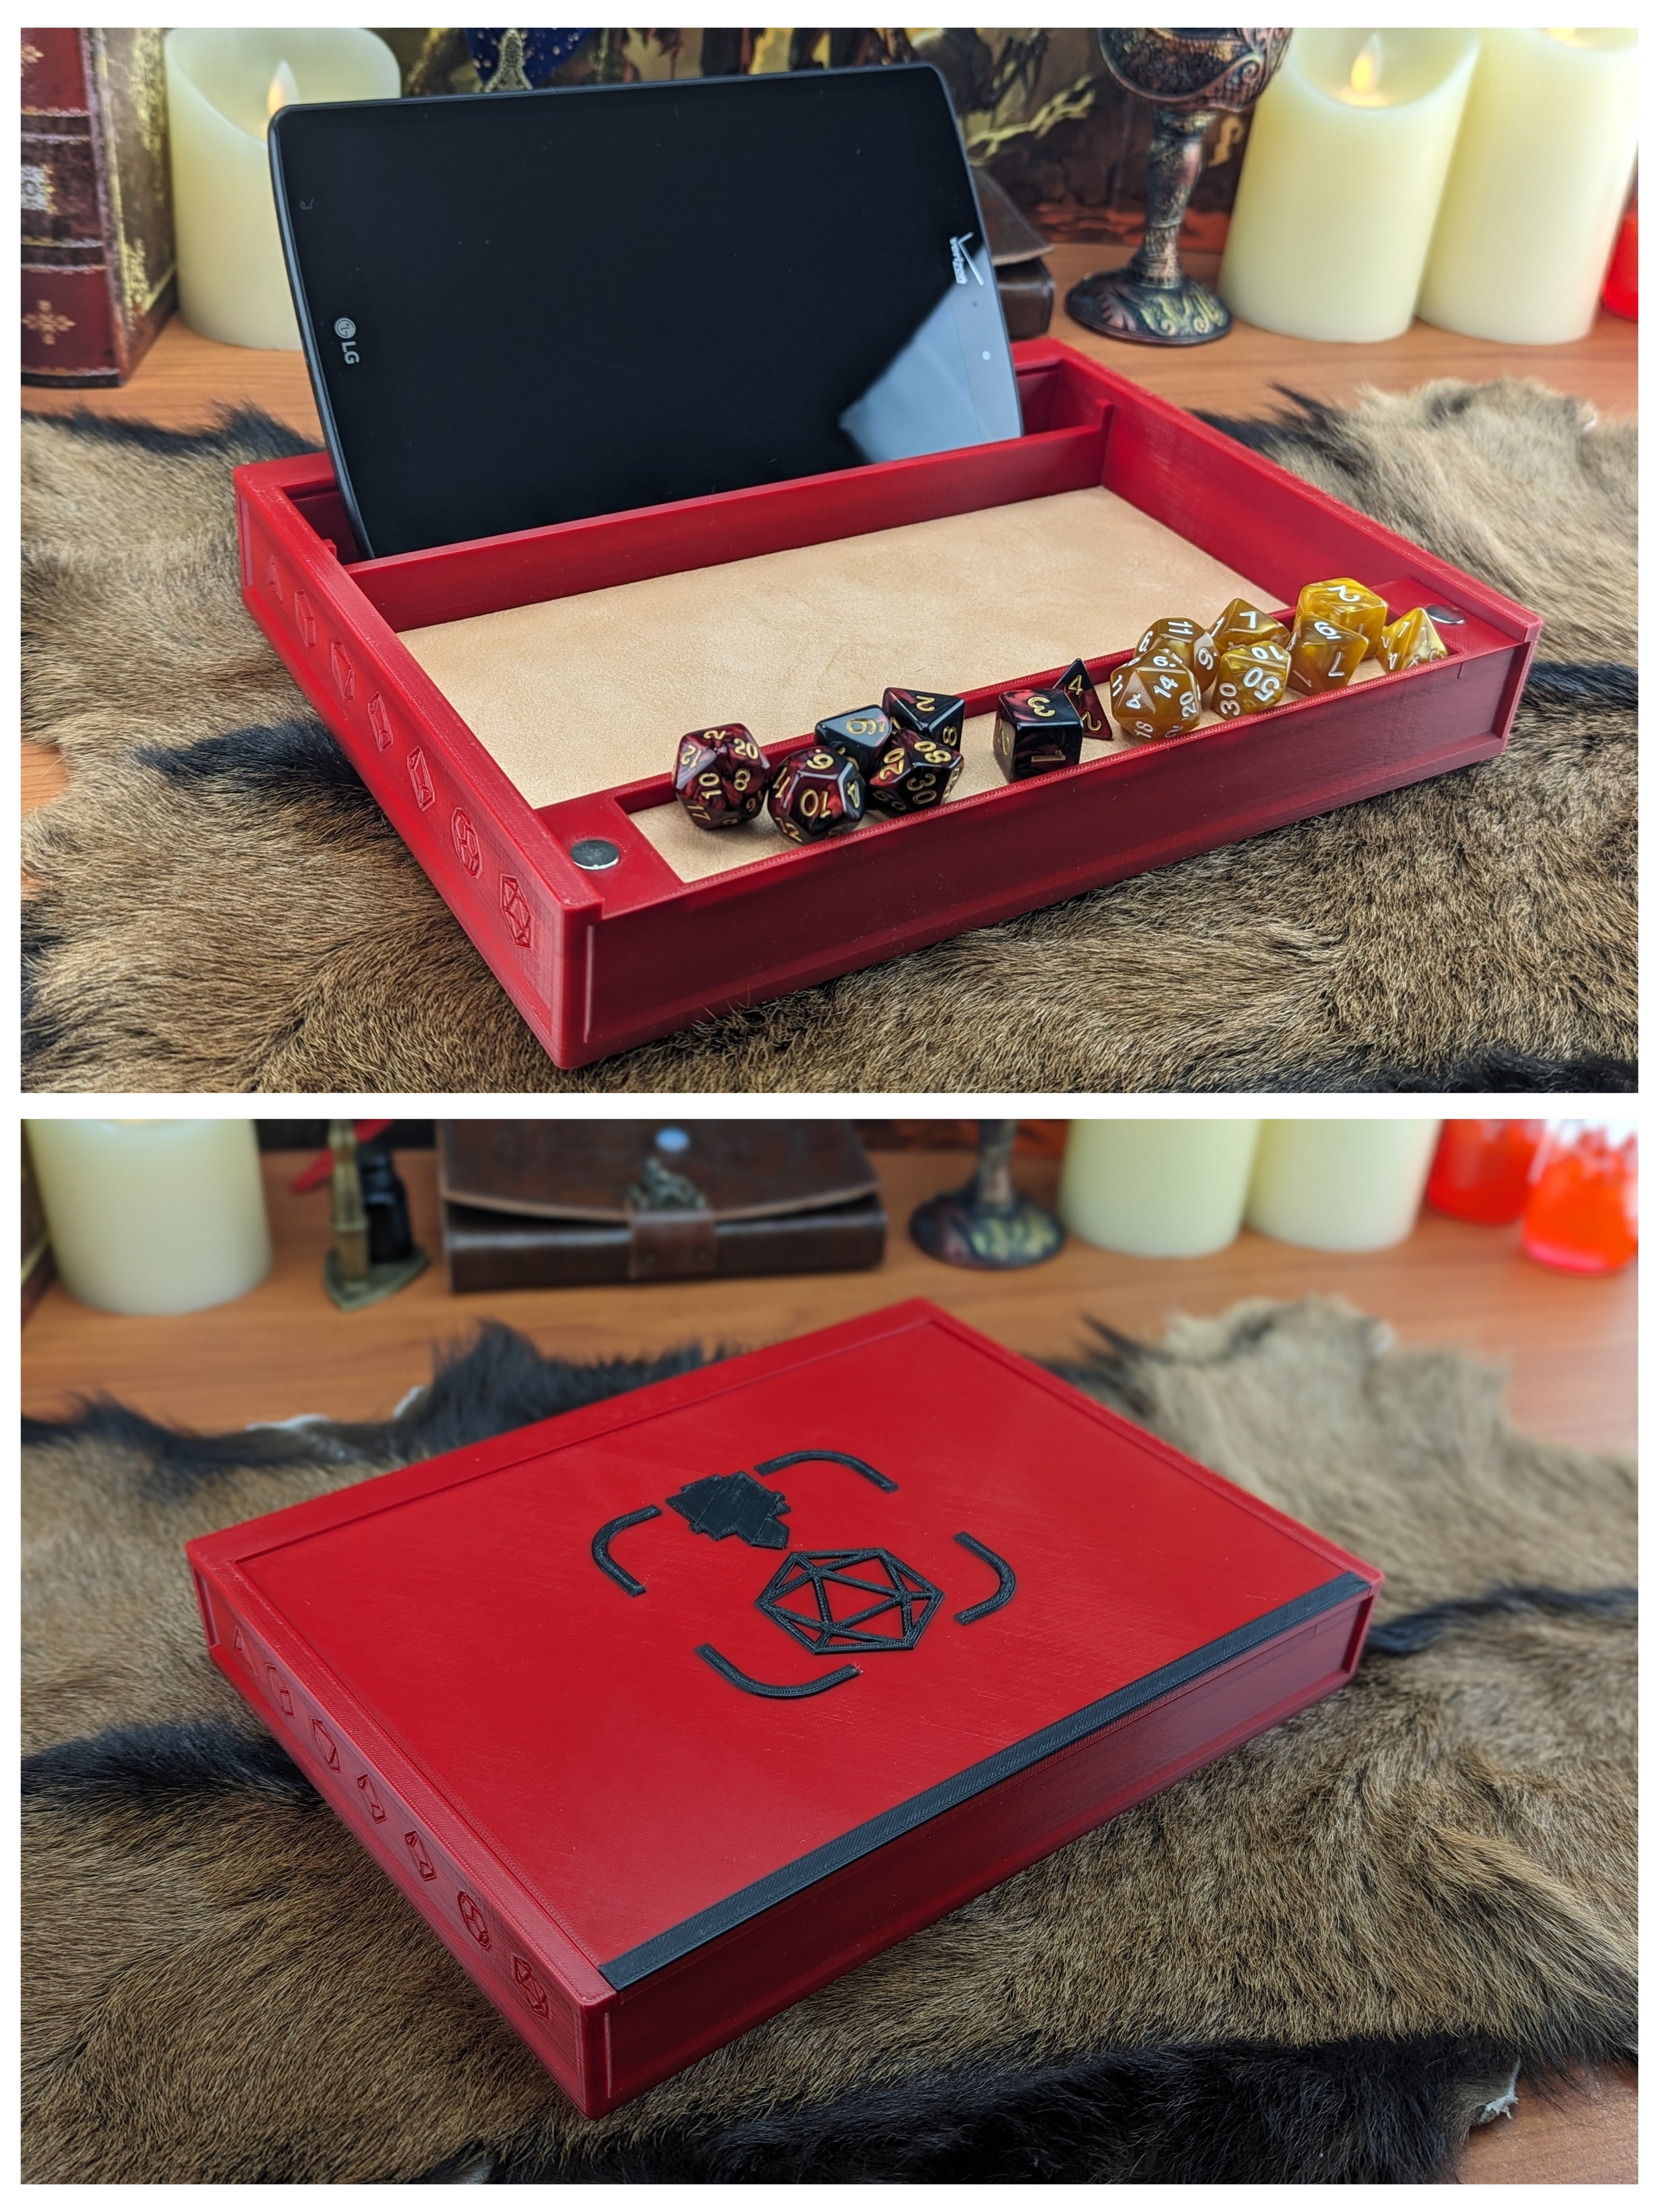 Dice Tray w/ Magnetic Lid